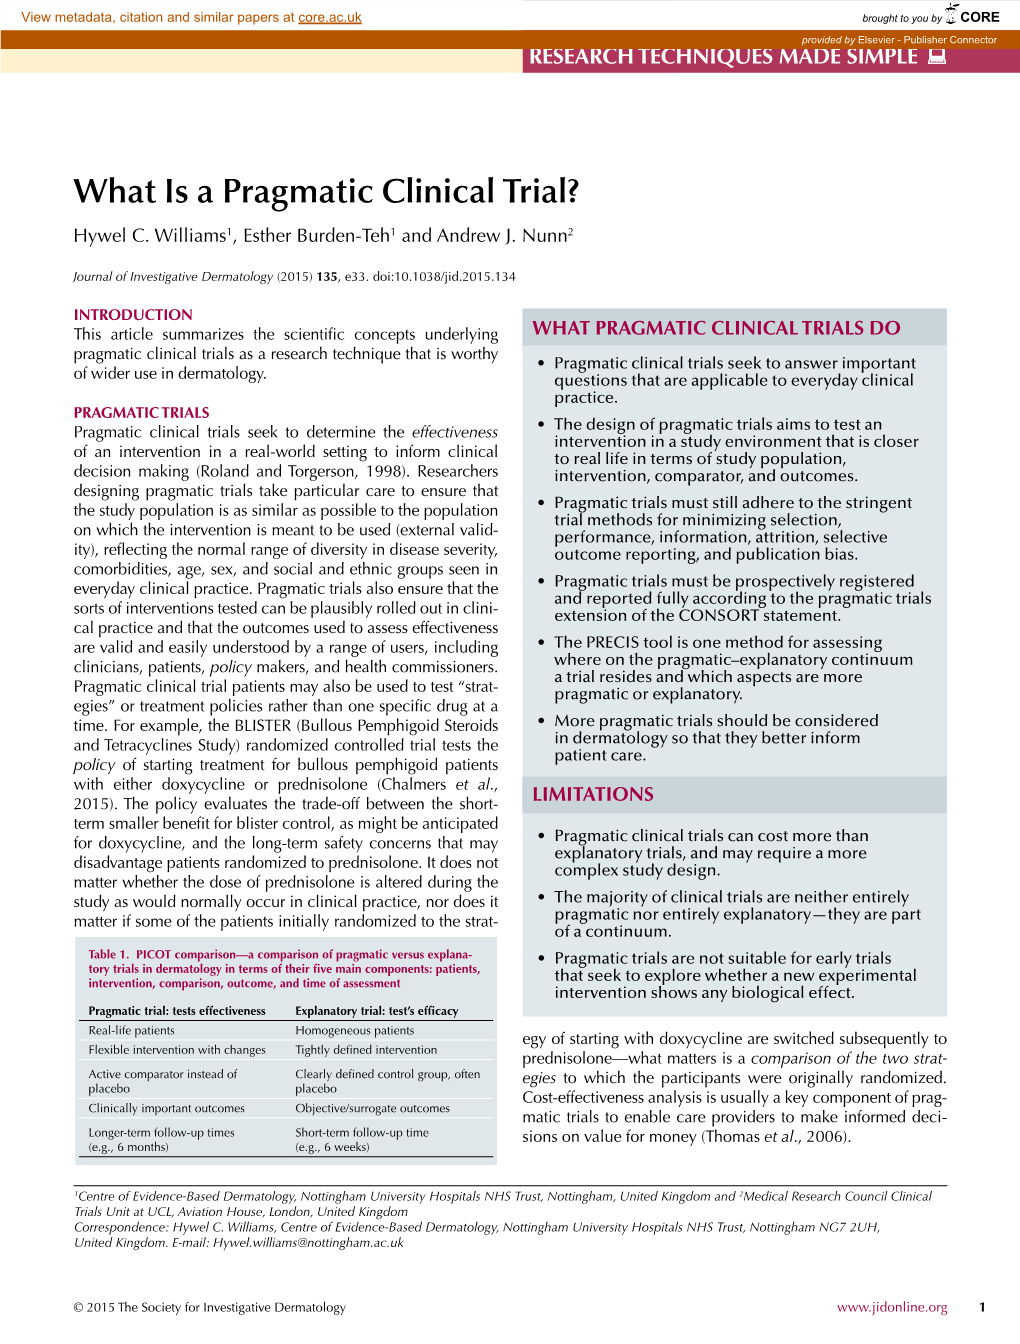 What Is a Pragmatic Clinical Trial? Hywel C